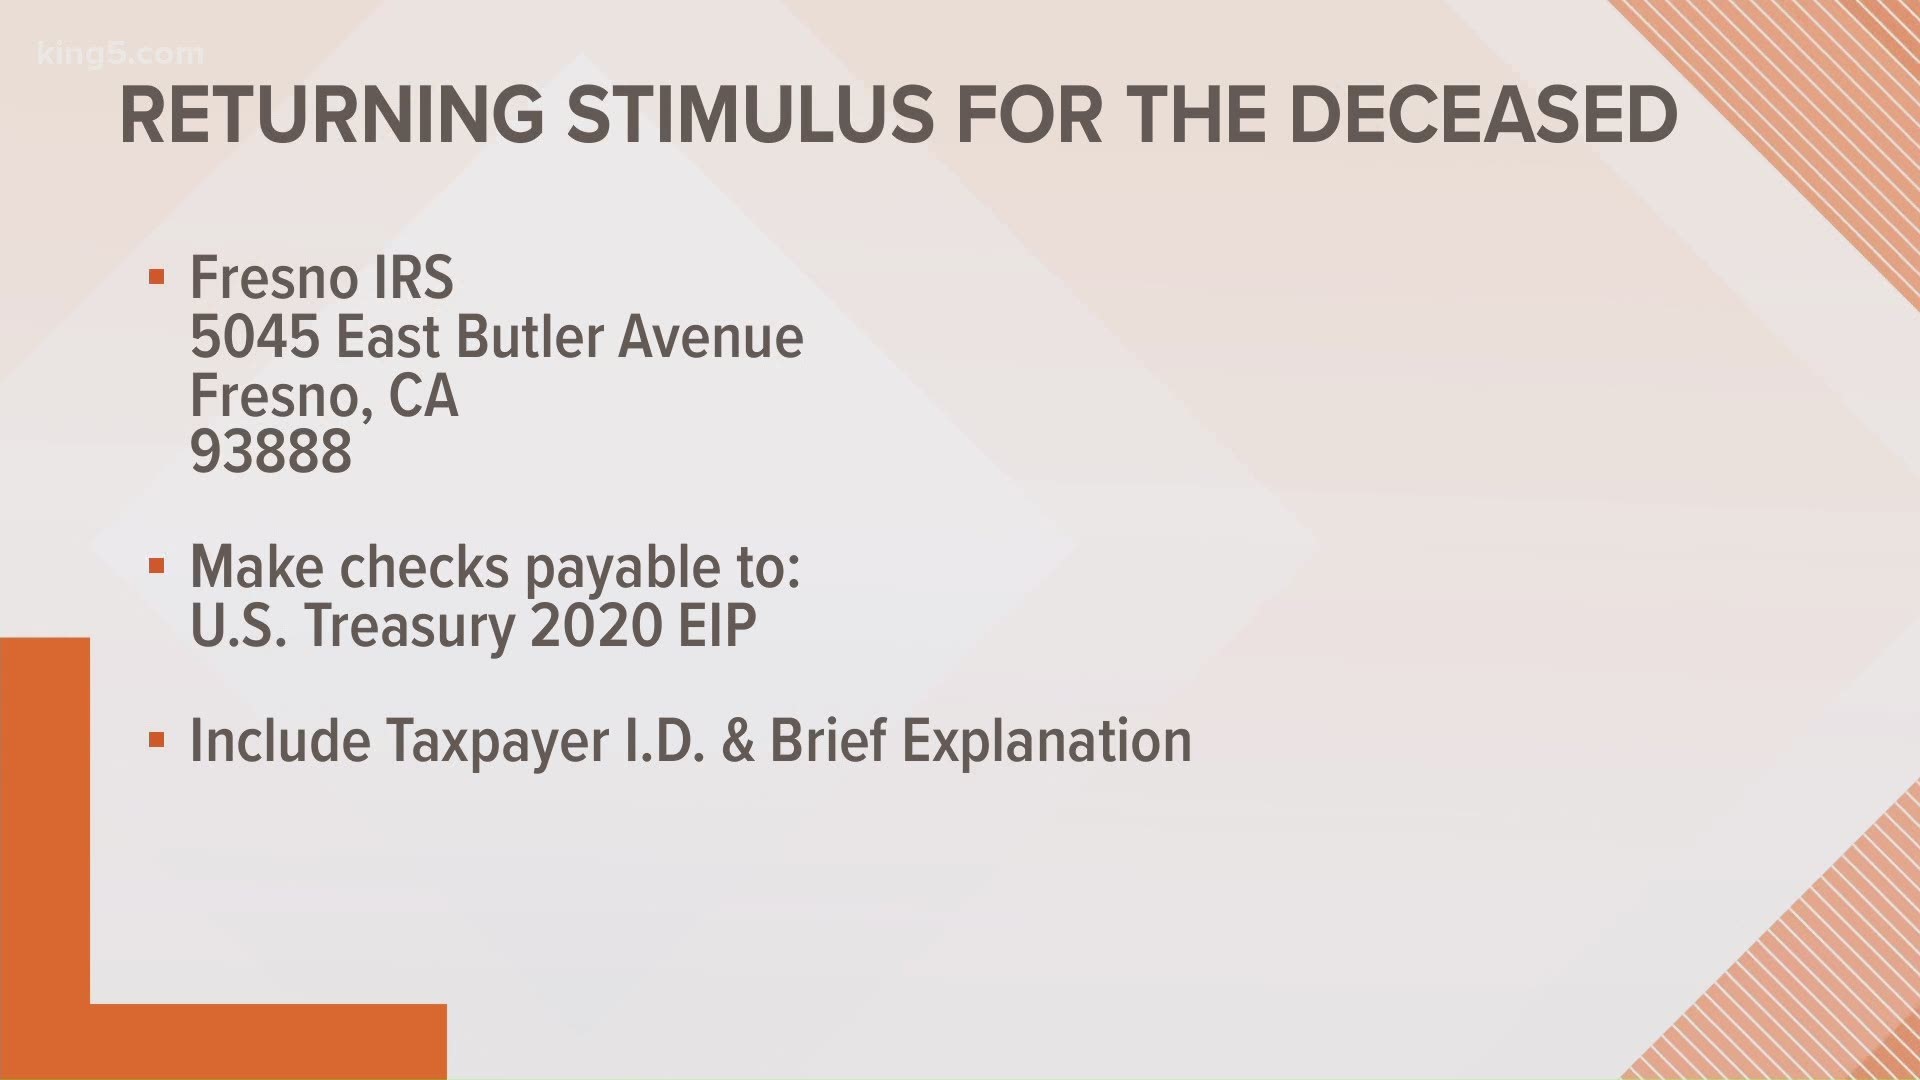 So, how exactly are you supposed to return a stimulus payment? Here's what the IRS says you should do.